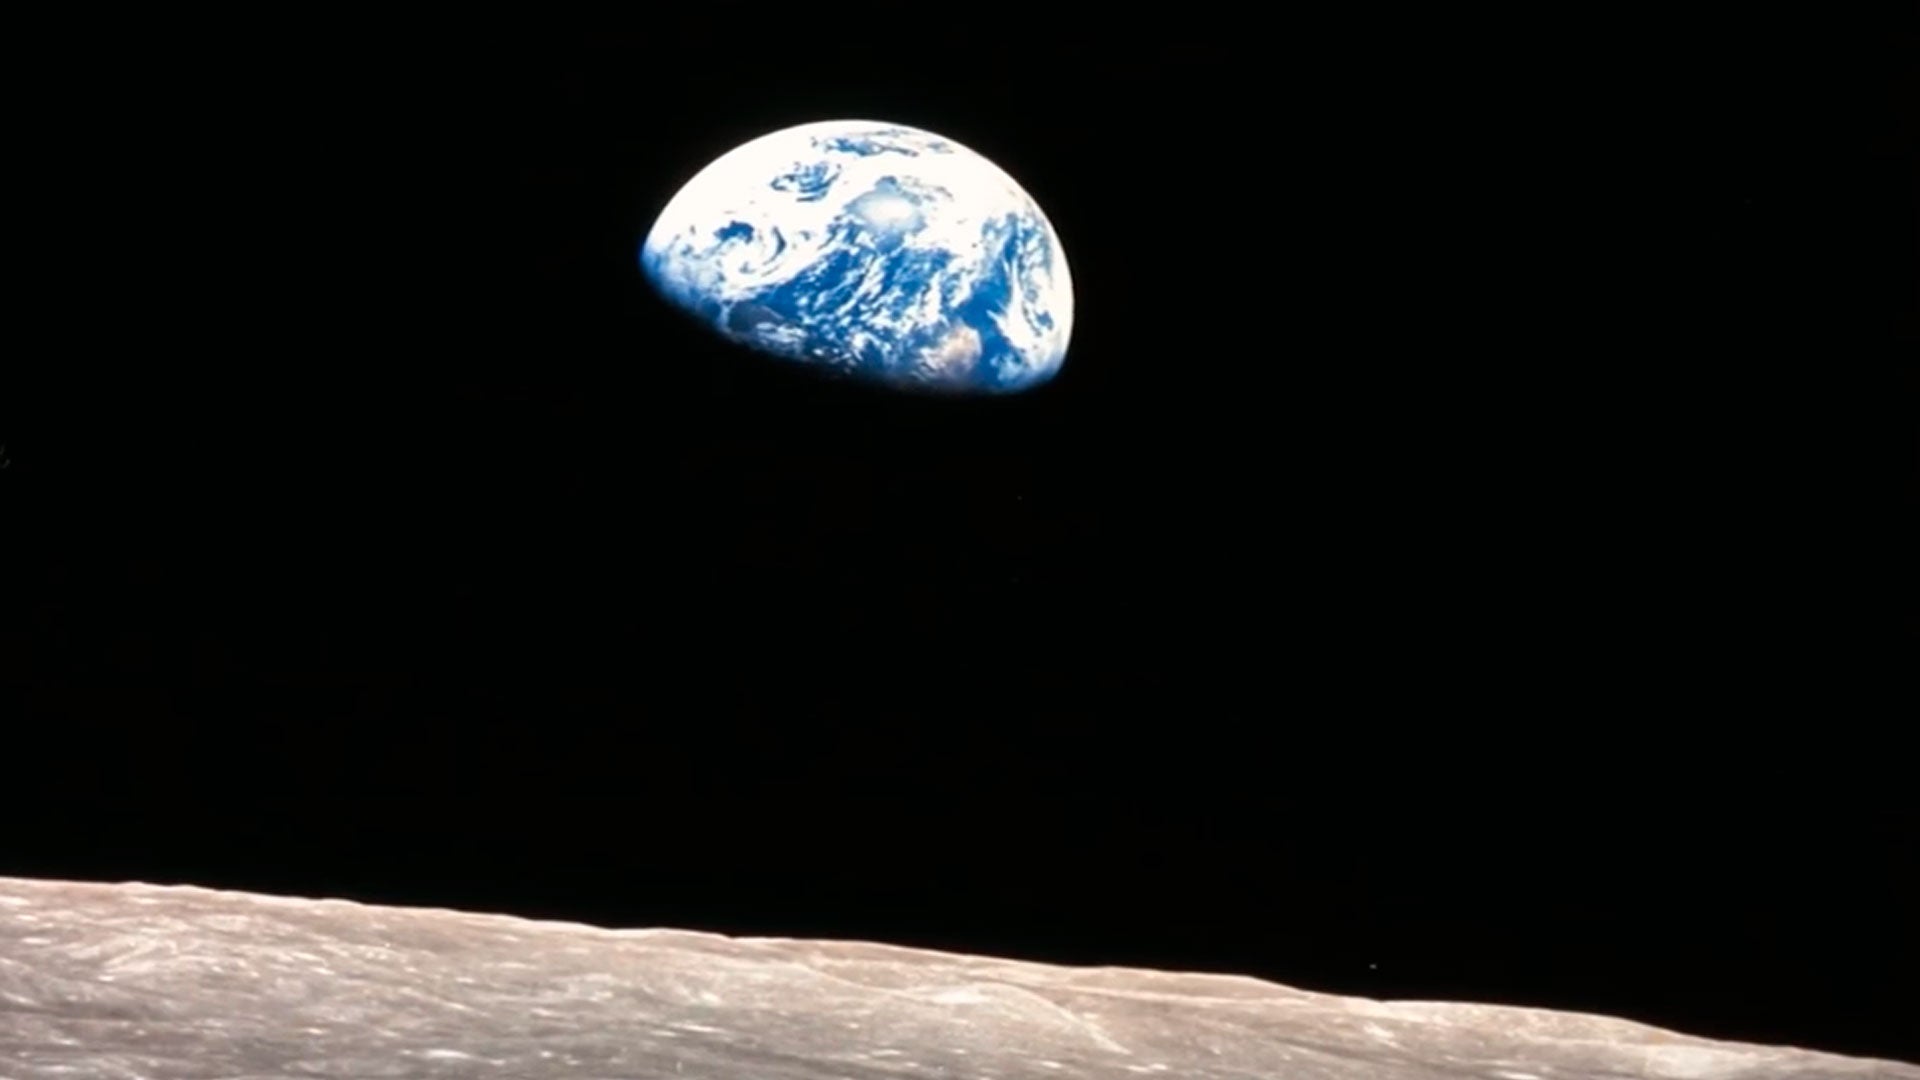 “In the beginning... God”: This Christmas message from NASA still resonates 55 years after Apollo 8